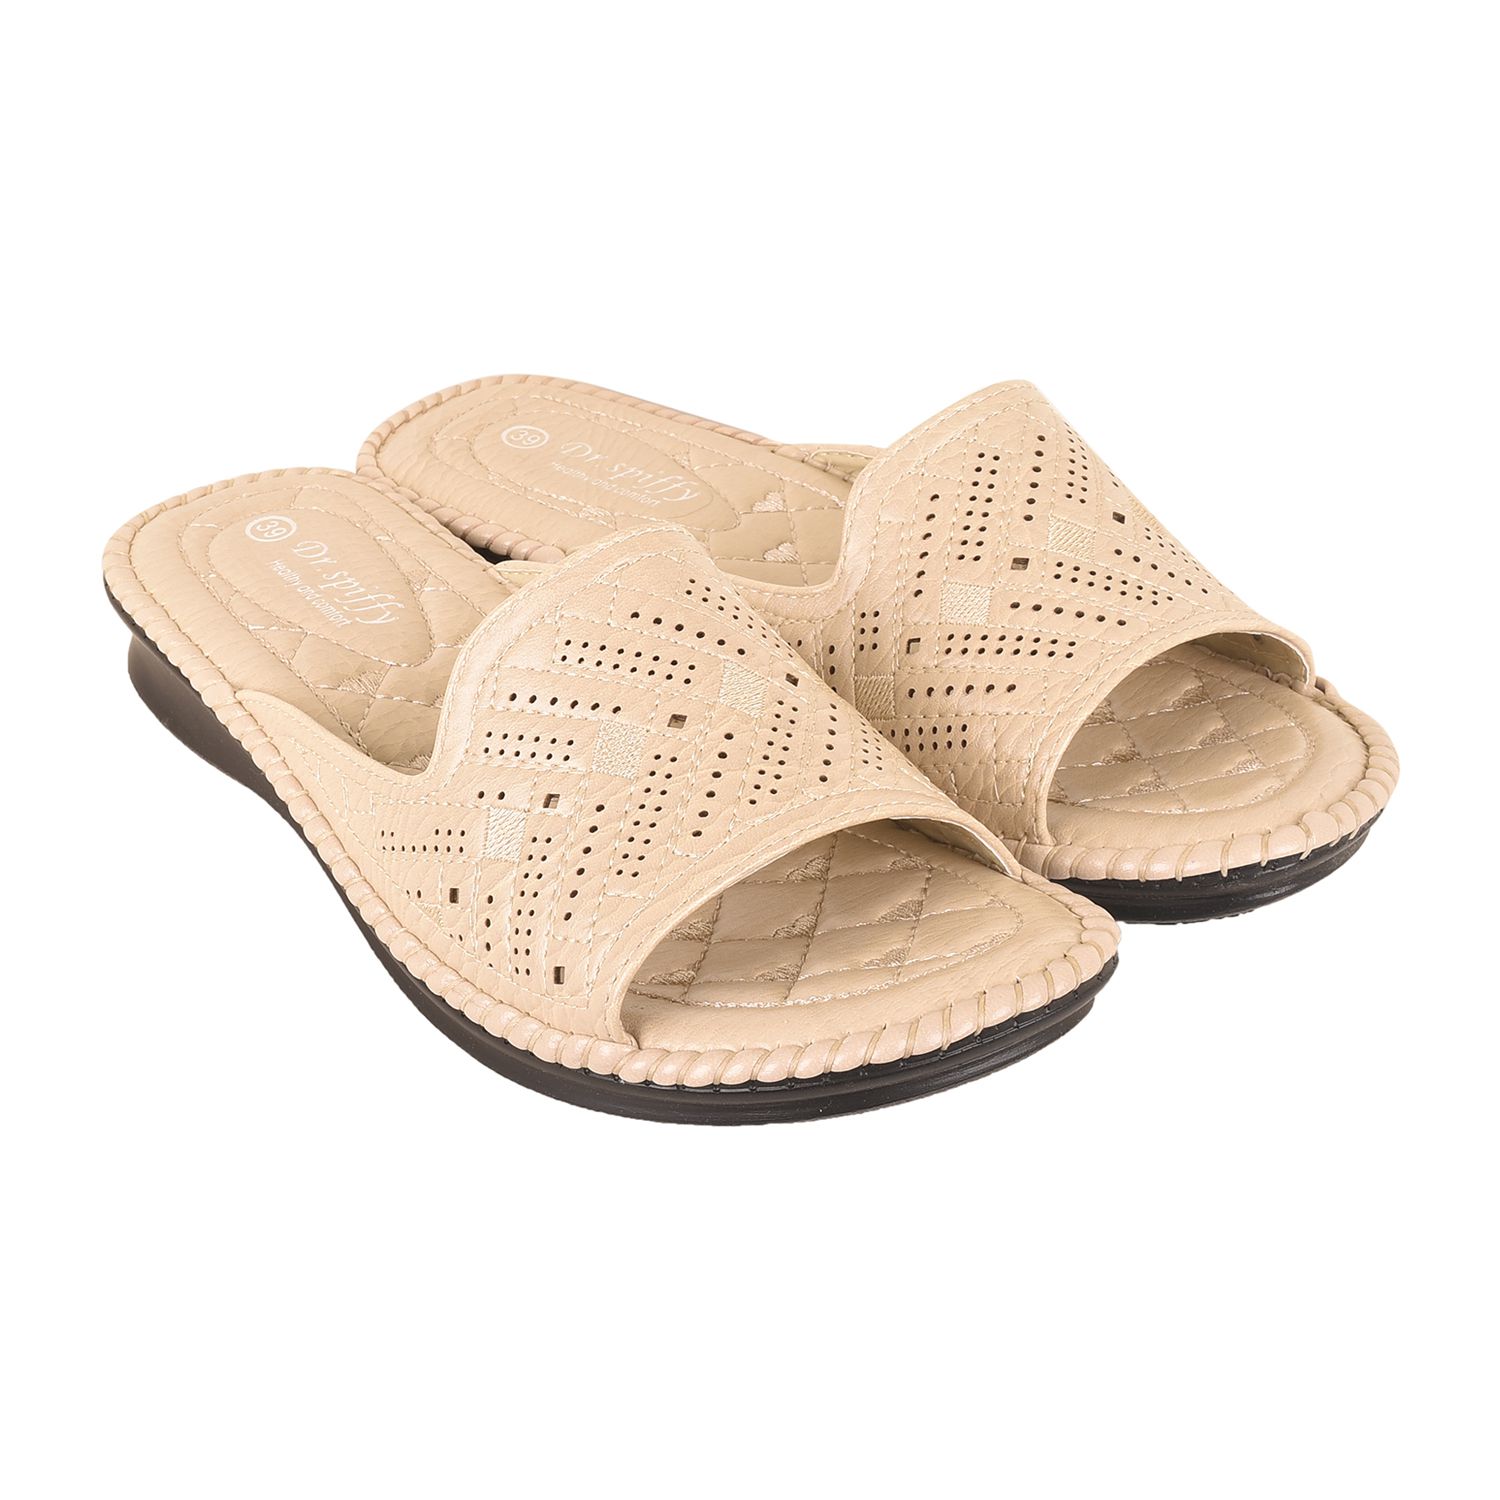 Shoeholic Beige Slippers Price in India- Buy Shoeholic Beige Slippers ...